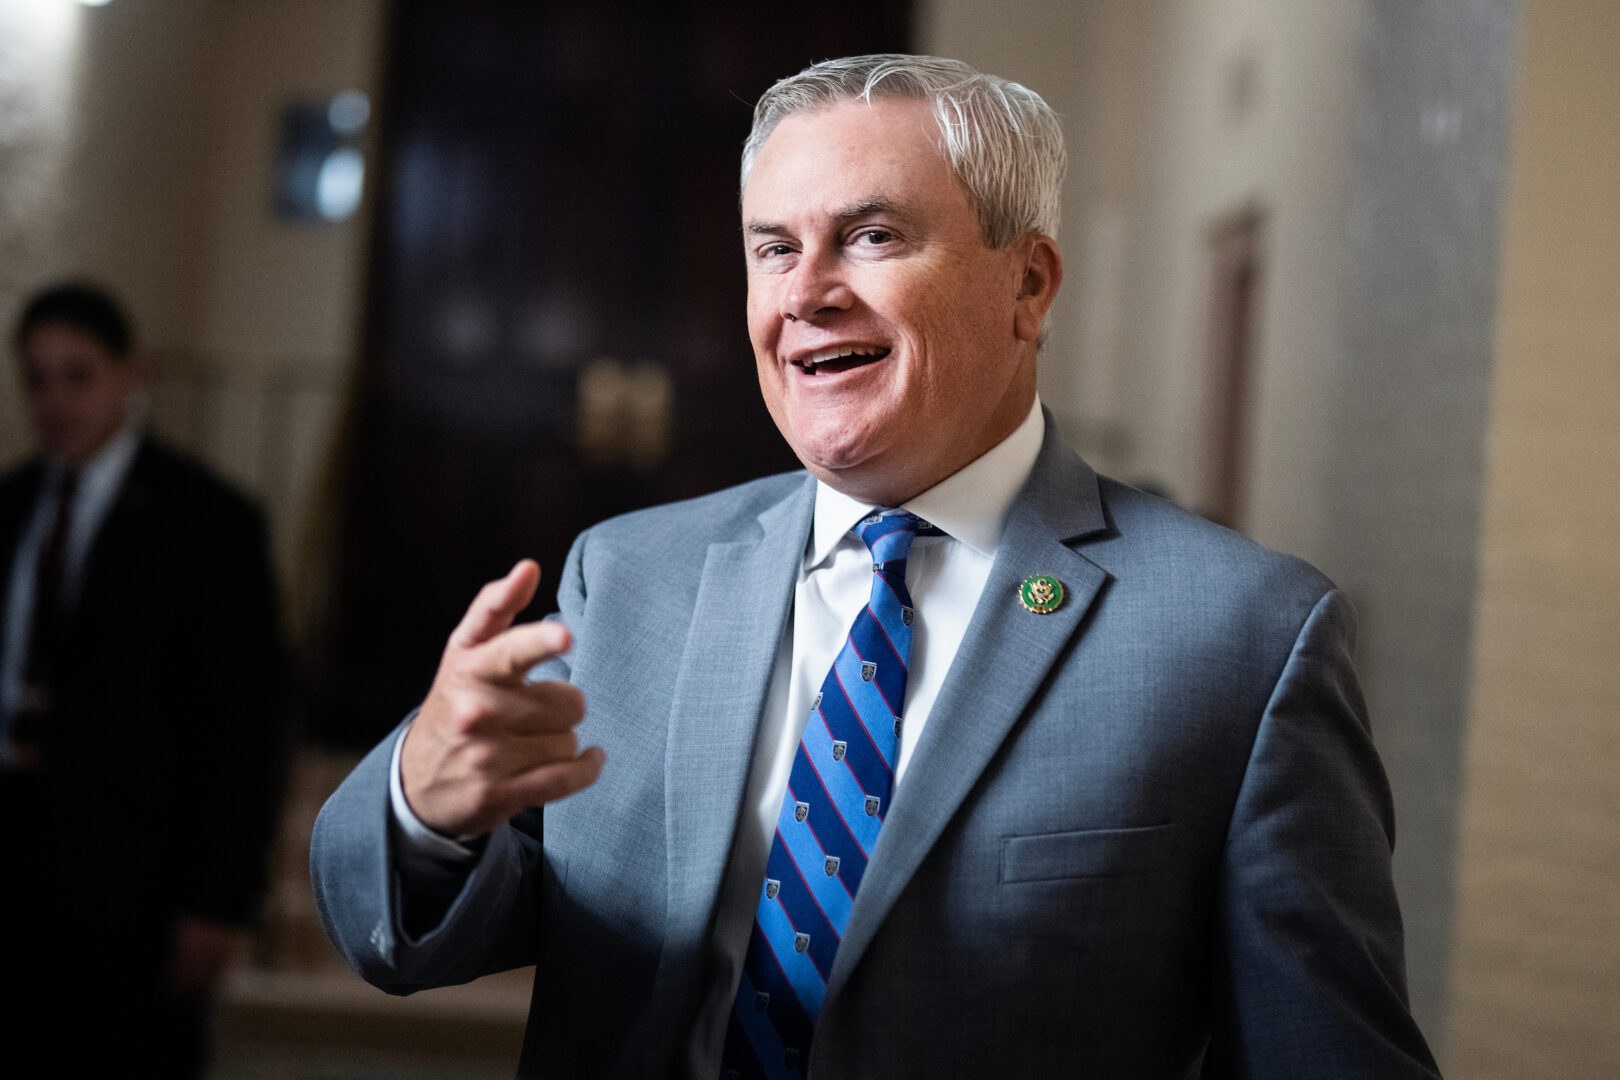 Rep. James R. Comer, R-Ky., leaves a House Republican Conference meeting in the Capitol on June 12.